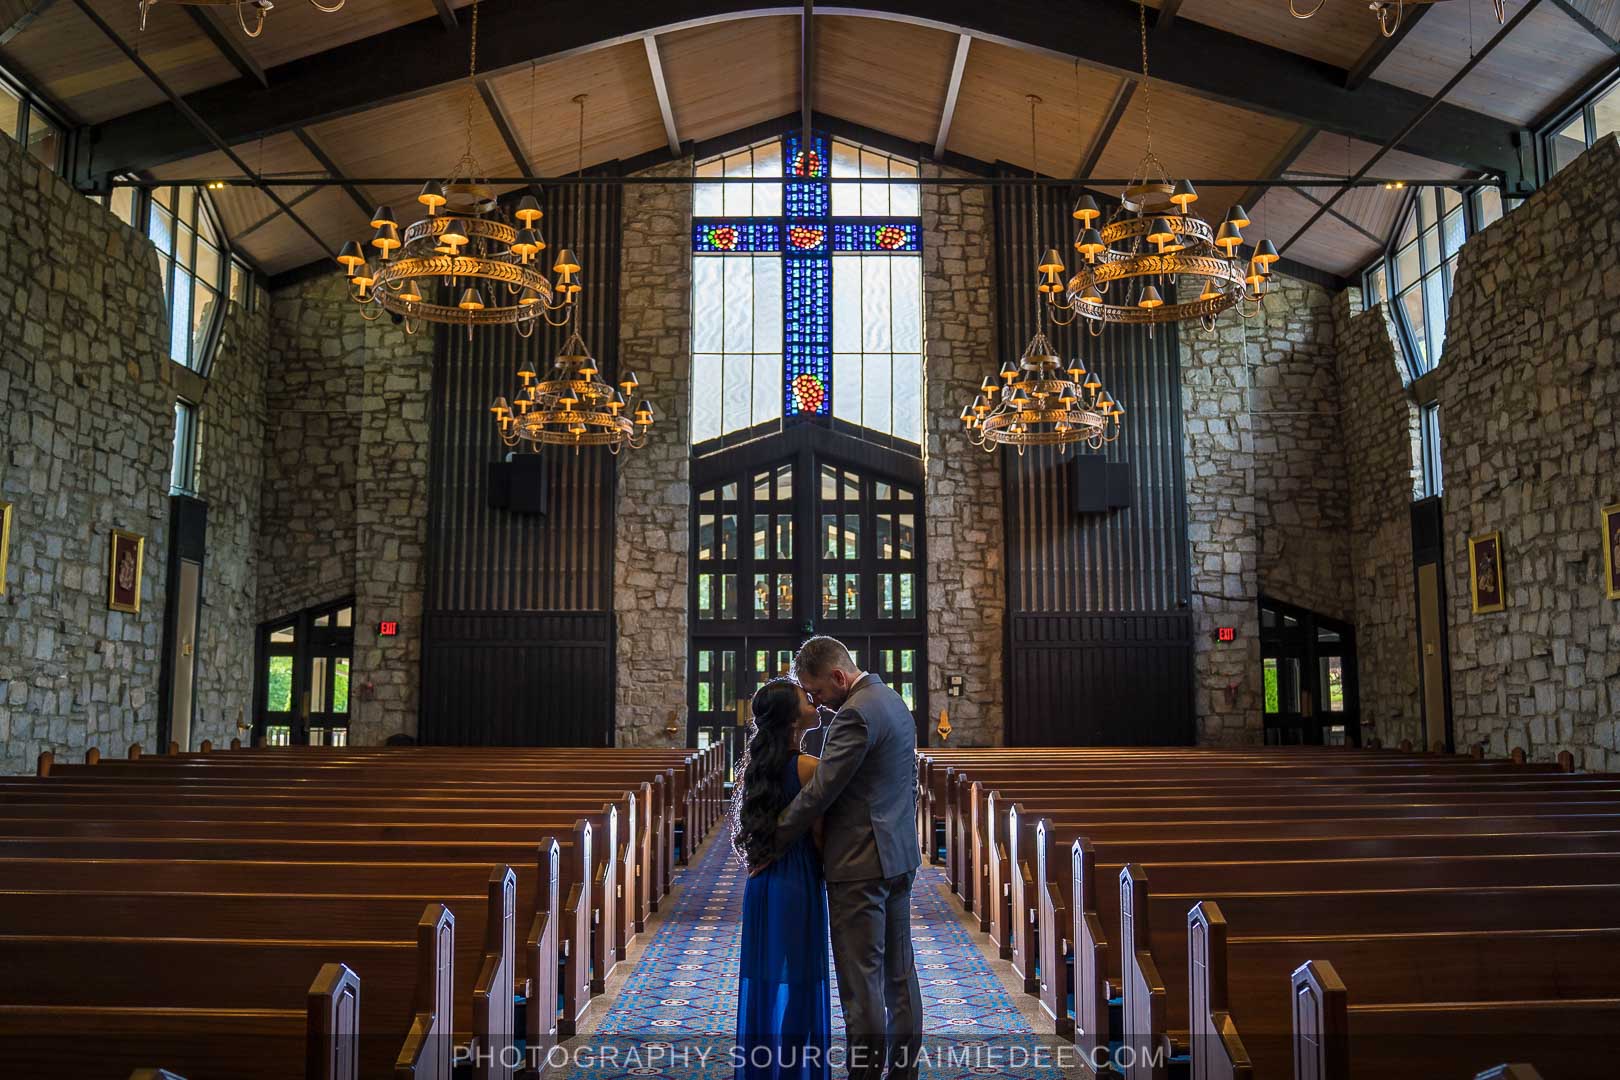 Summer Engagement Photos - Indoors in a church